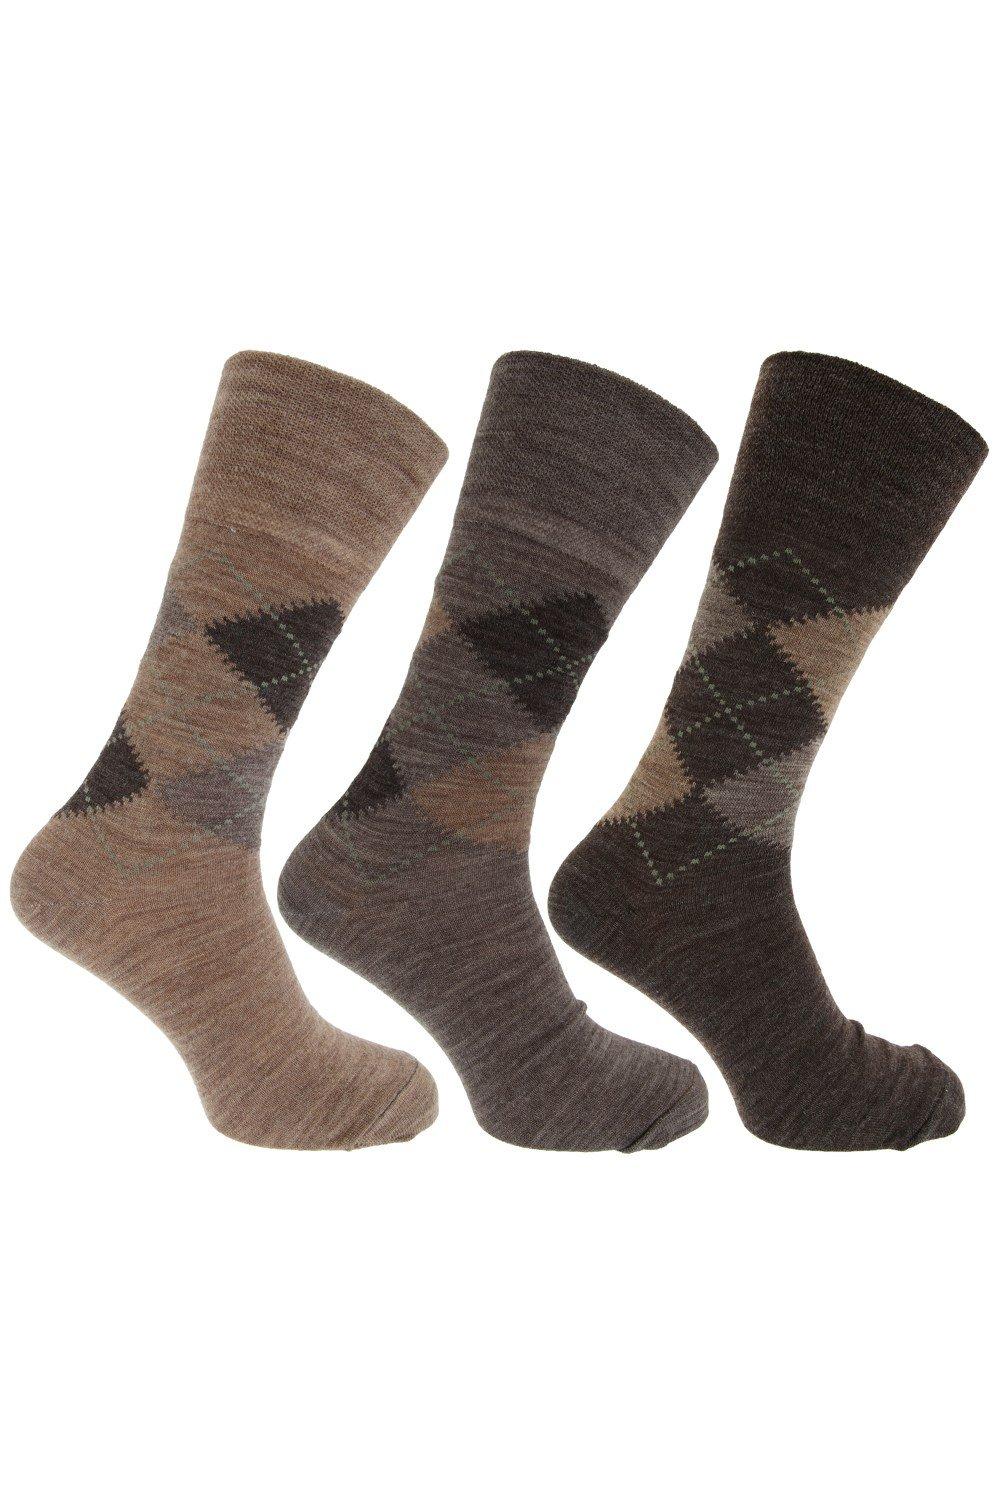 Traditional Argyle Pattern Non Elastic Lambs Wool Blend Socks (Pack Of 3)